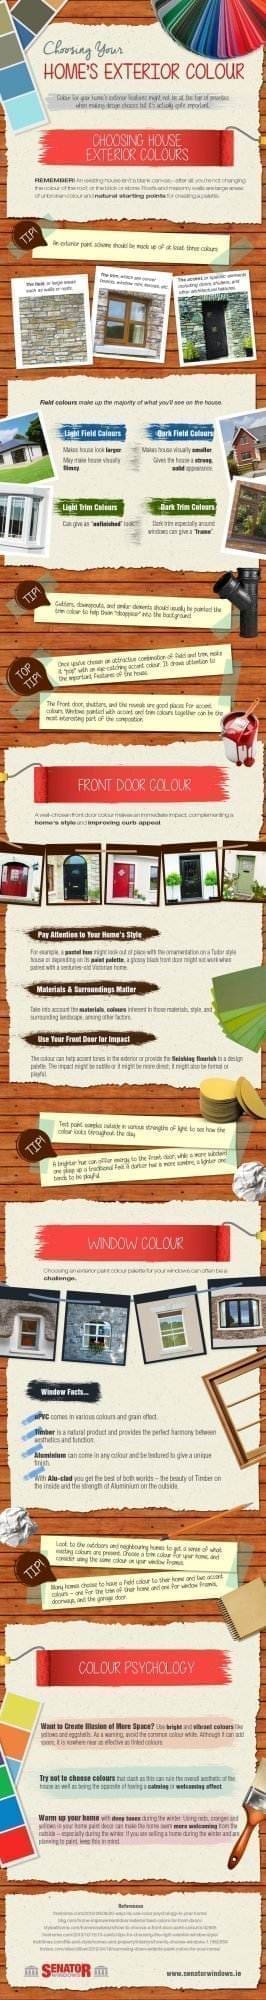 Colour-Projects-for-the-Home-Infographic